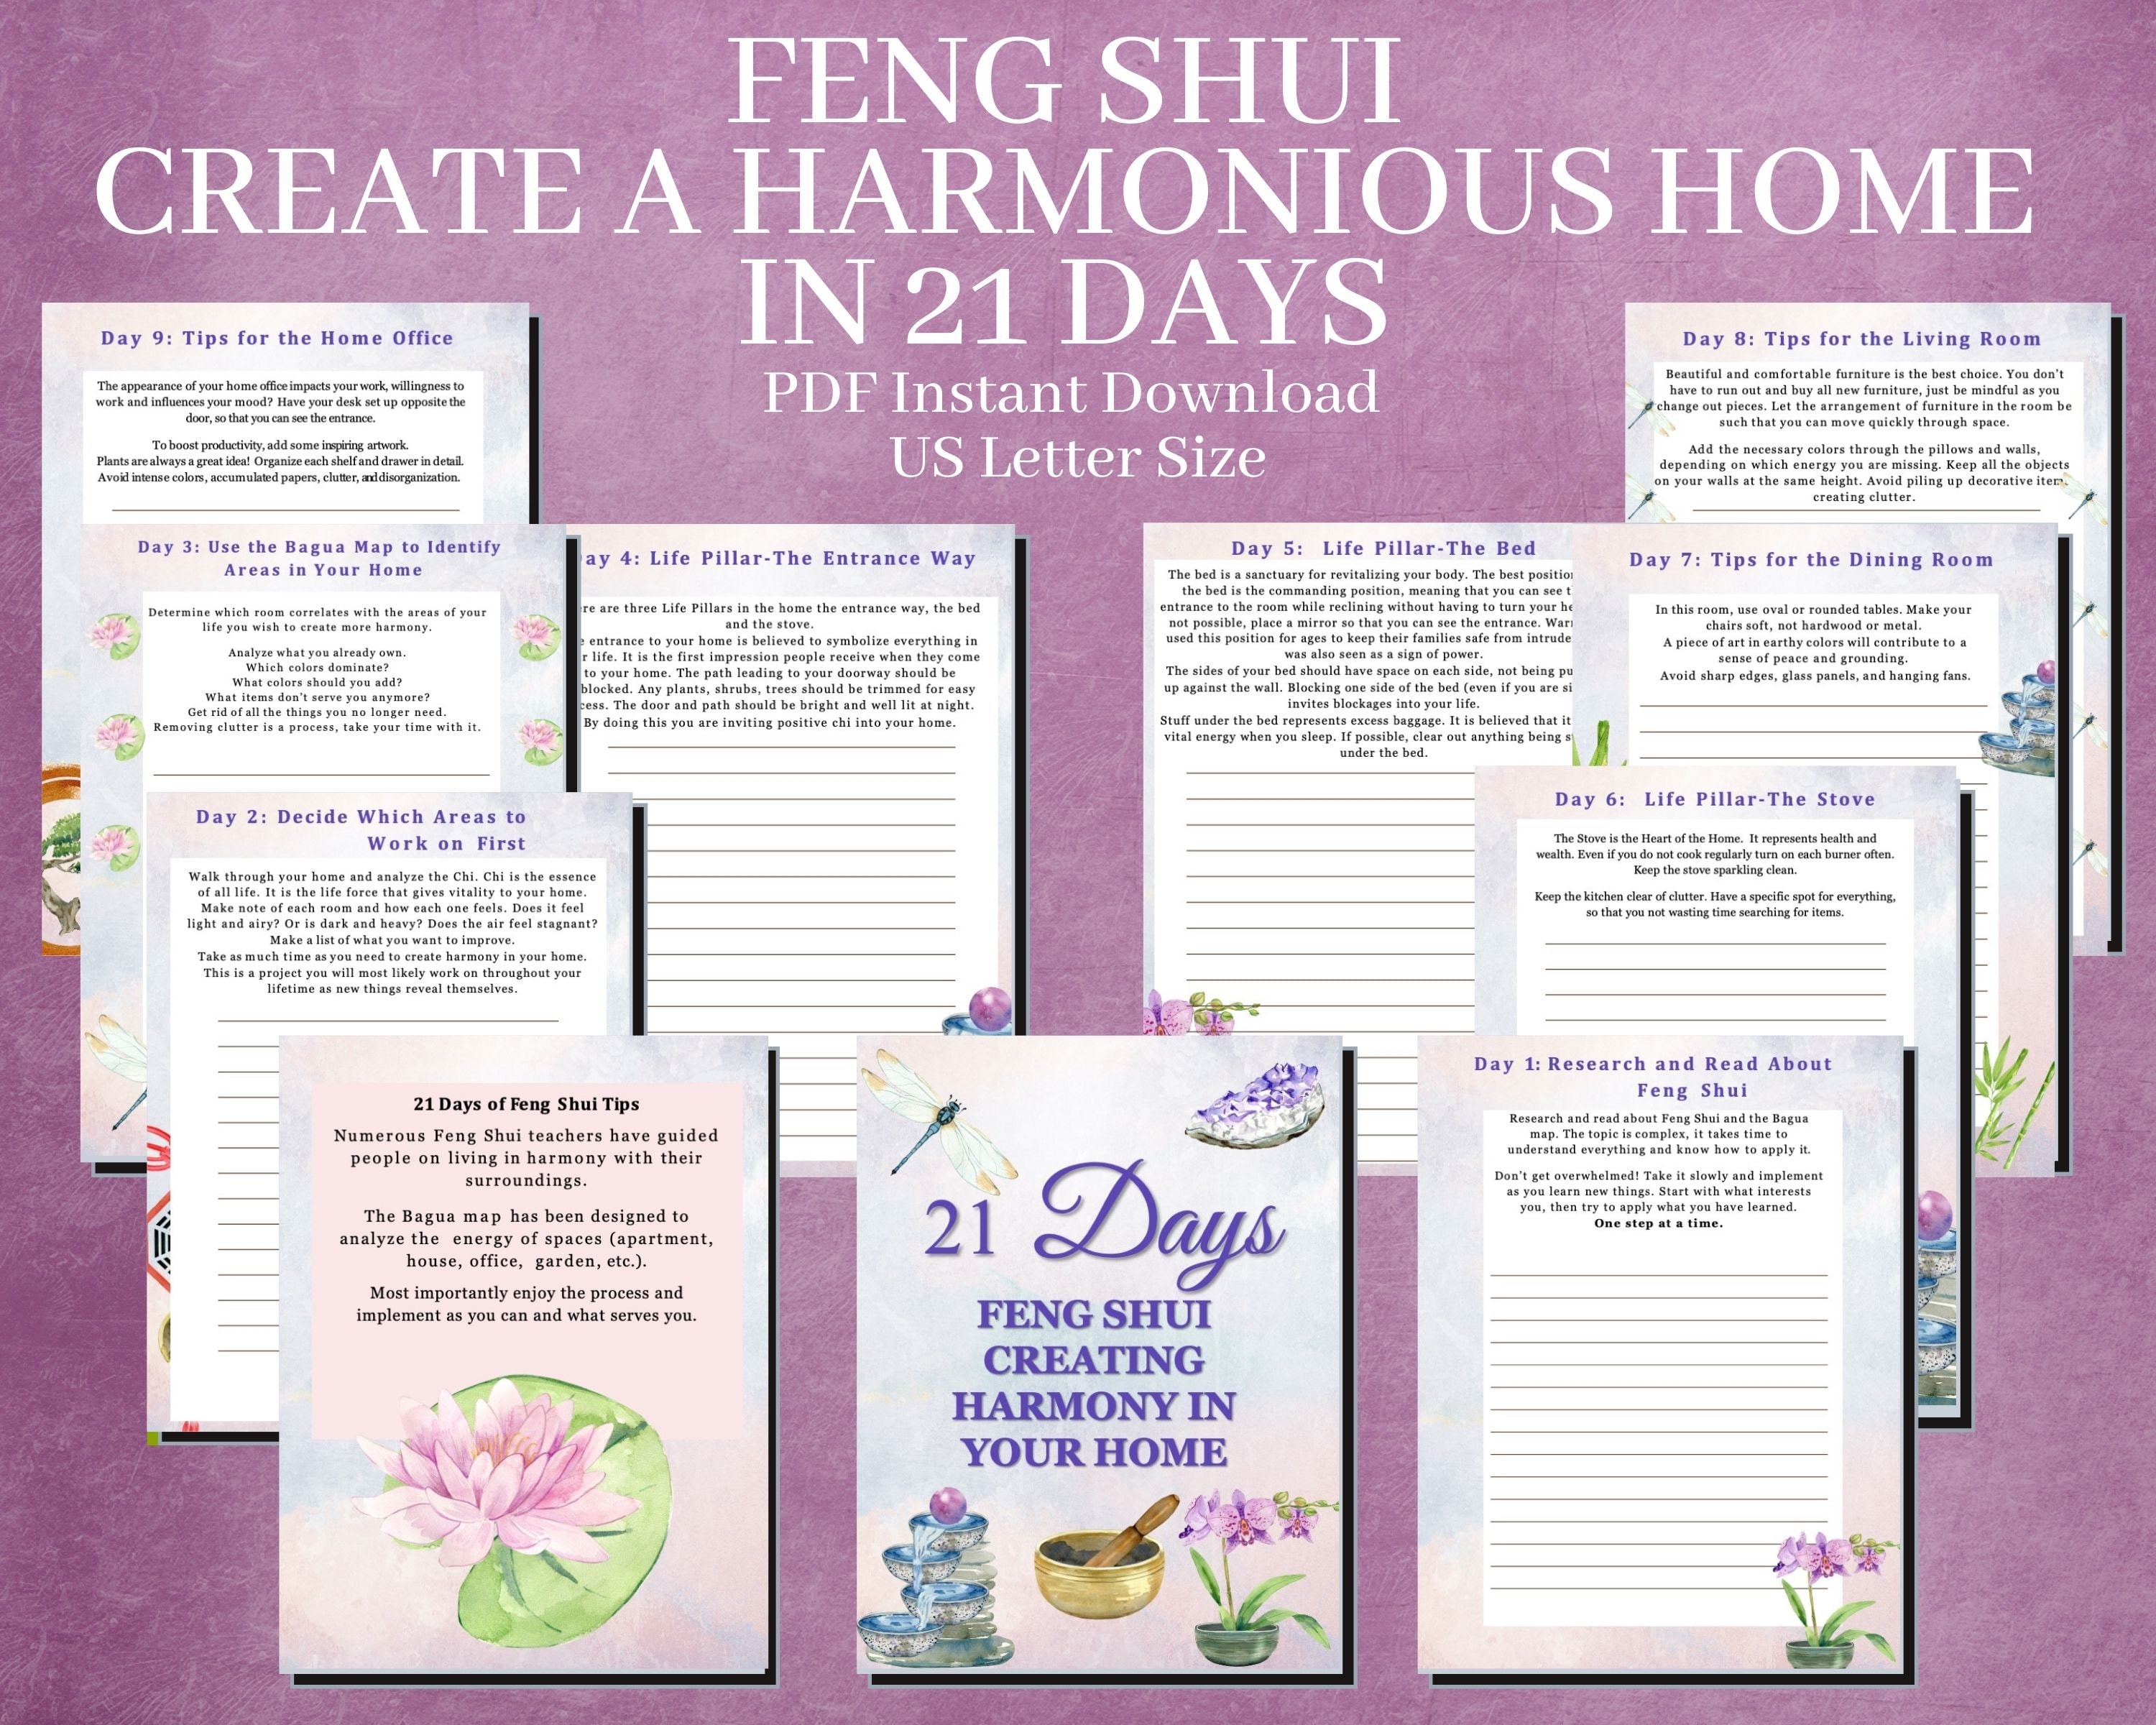  Feng Shui: From Beginner to Expert, Illustrated Version ~ Start  Using Feng Shui Today to Attract Happiness and Success ( Feng Shui 'Bagua'  Map, Feng Shui Colors, Feng Shui Tips )